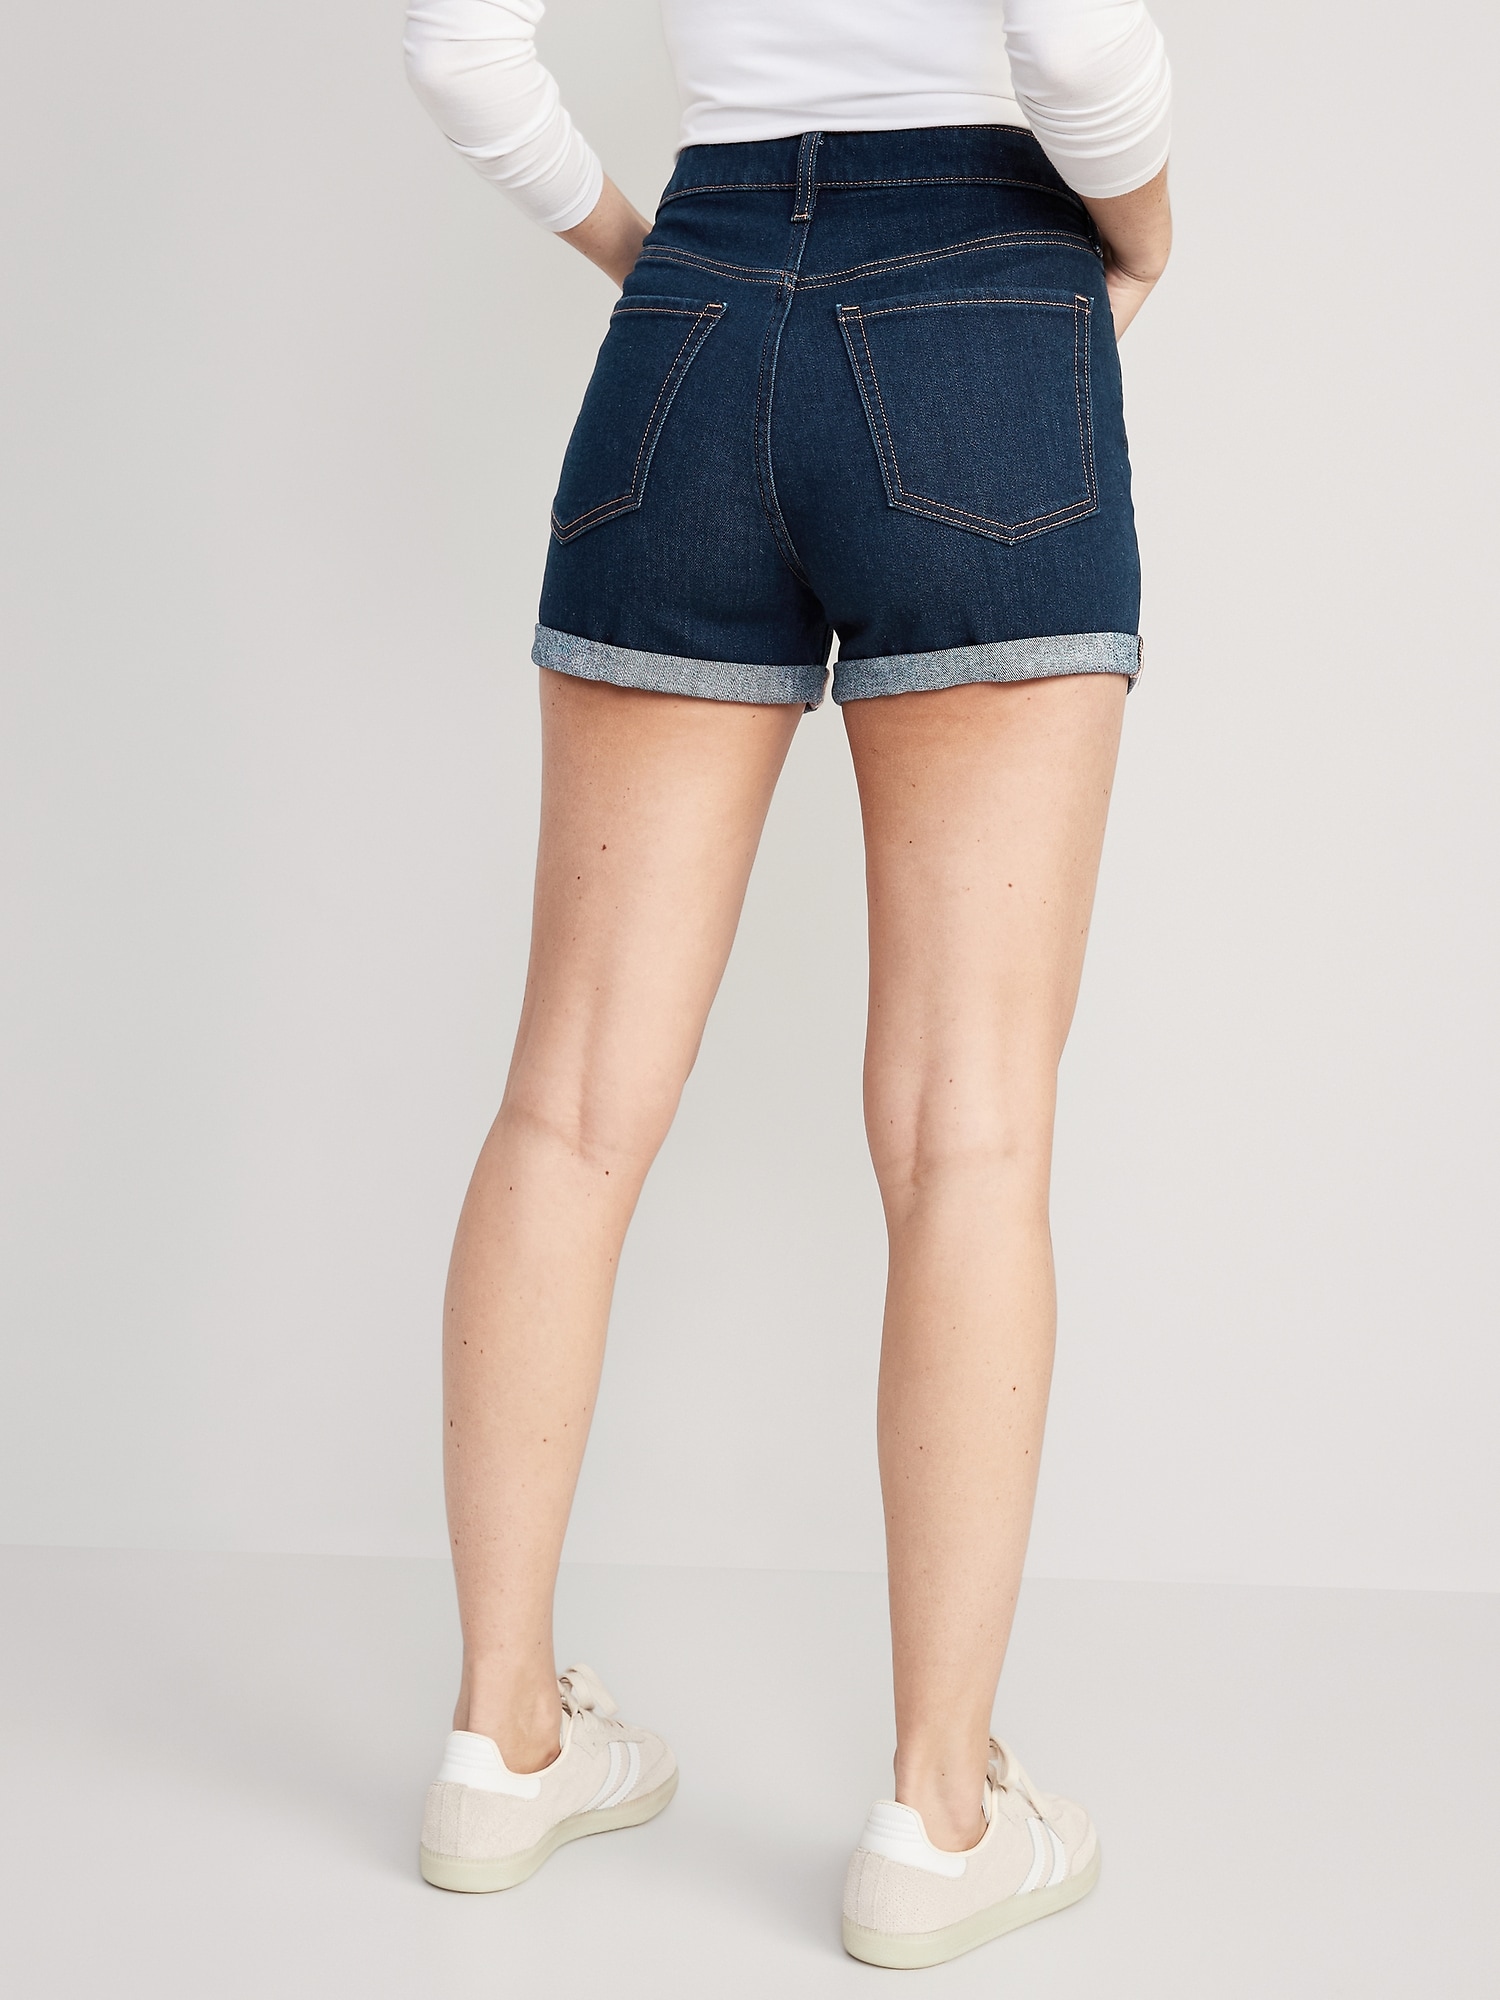 Wow Jean Shorts for Women -- 3-inch inseam | Old Navy